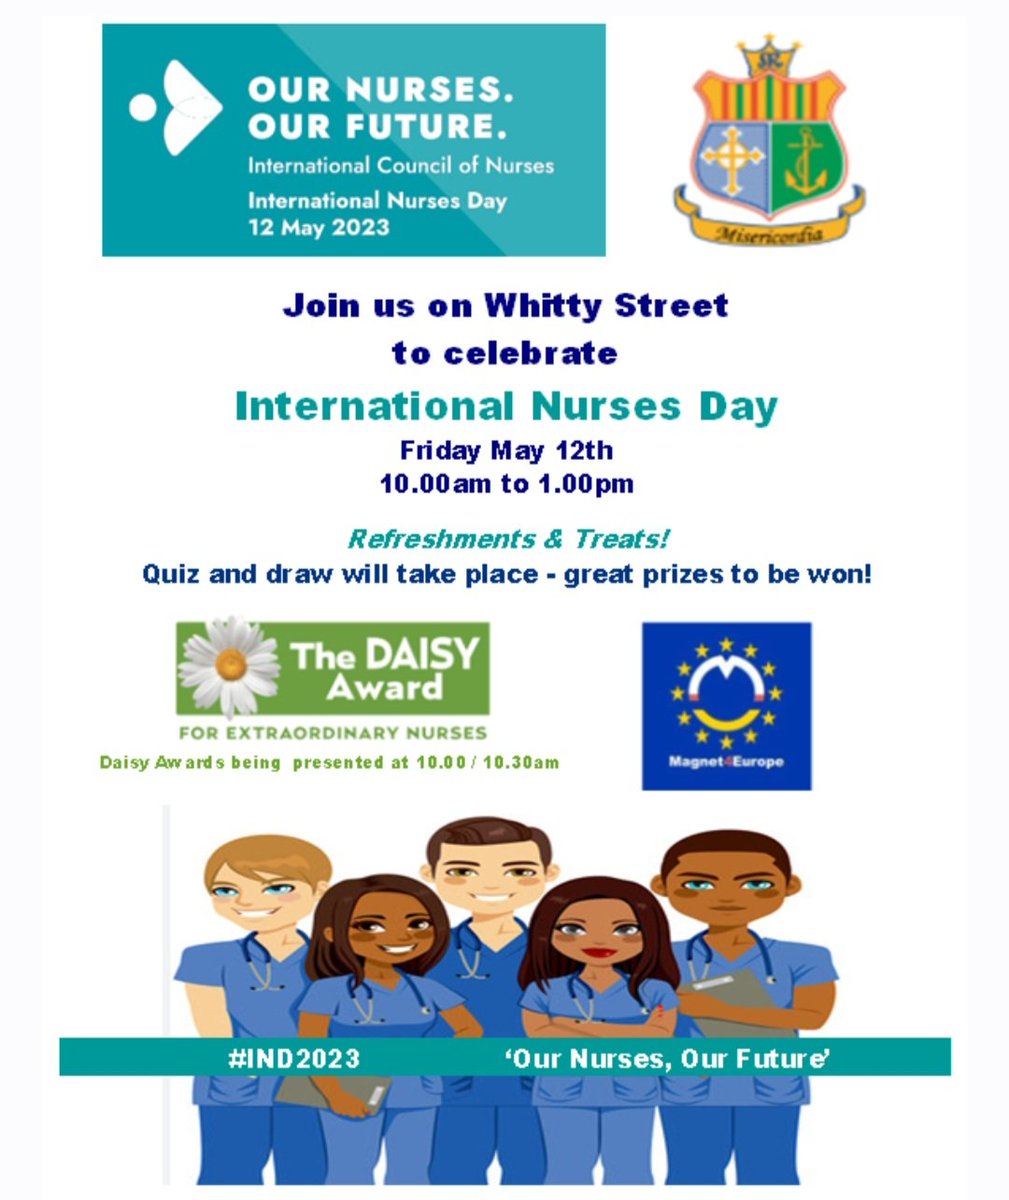 Happy International Nurses Day to all our Nursing colleagues in Ireland and abroad. Join us for  celebrations throughout the day as we showcase and celebrate our profession  #maternurses #InternationalNursesDay @sandraf53135246 @IreneAloveros @yvonne_timony @MaterTVNs @AnpMater